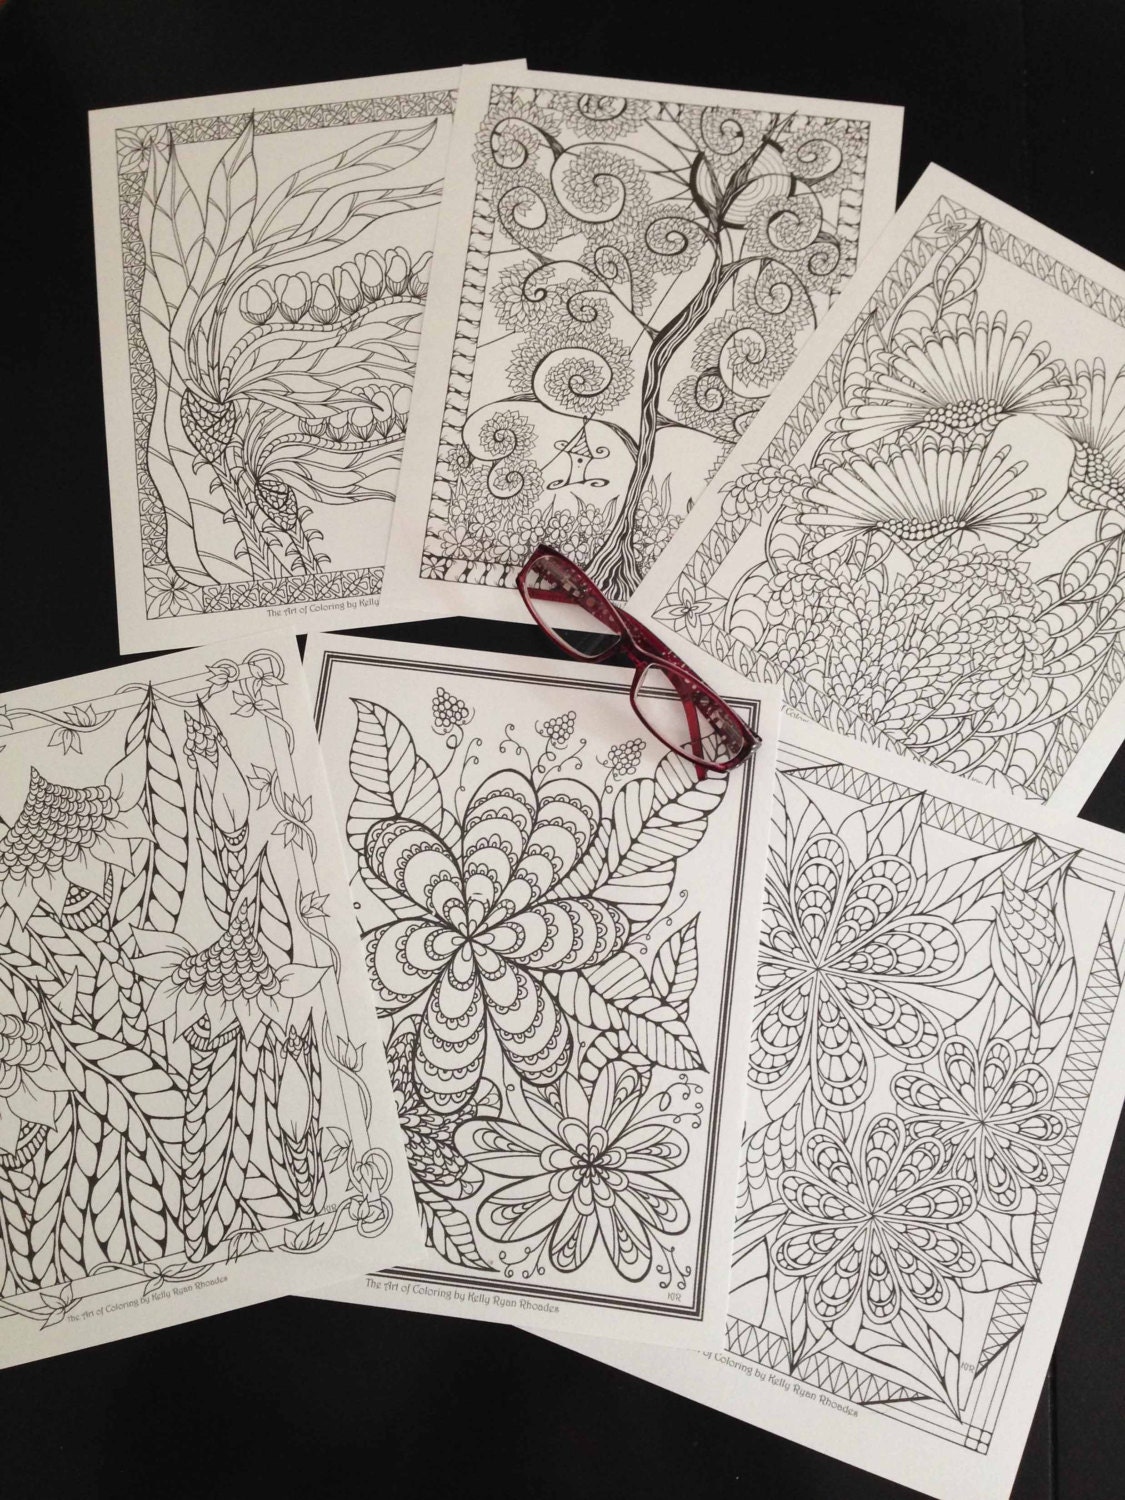 Digital Coloring Book-PDF by TheArtofColoring on Etsy